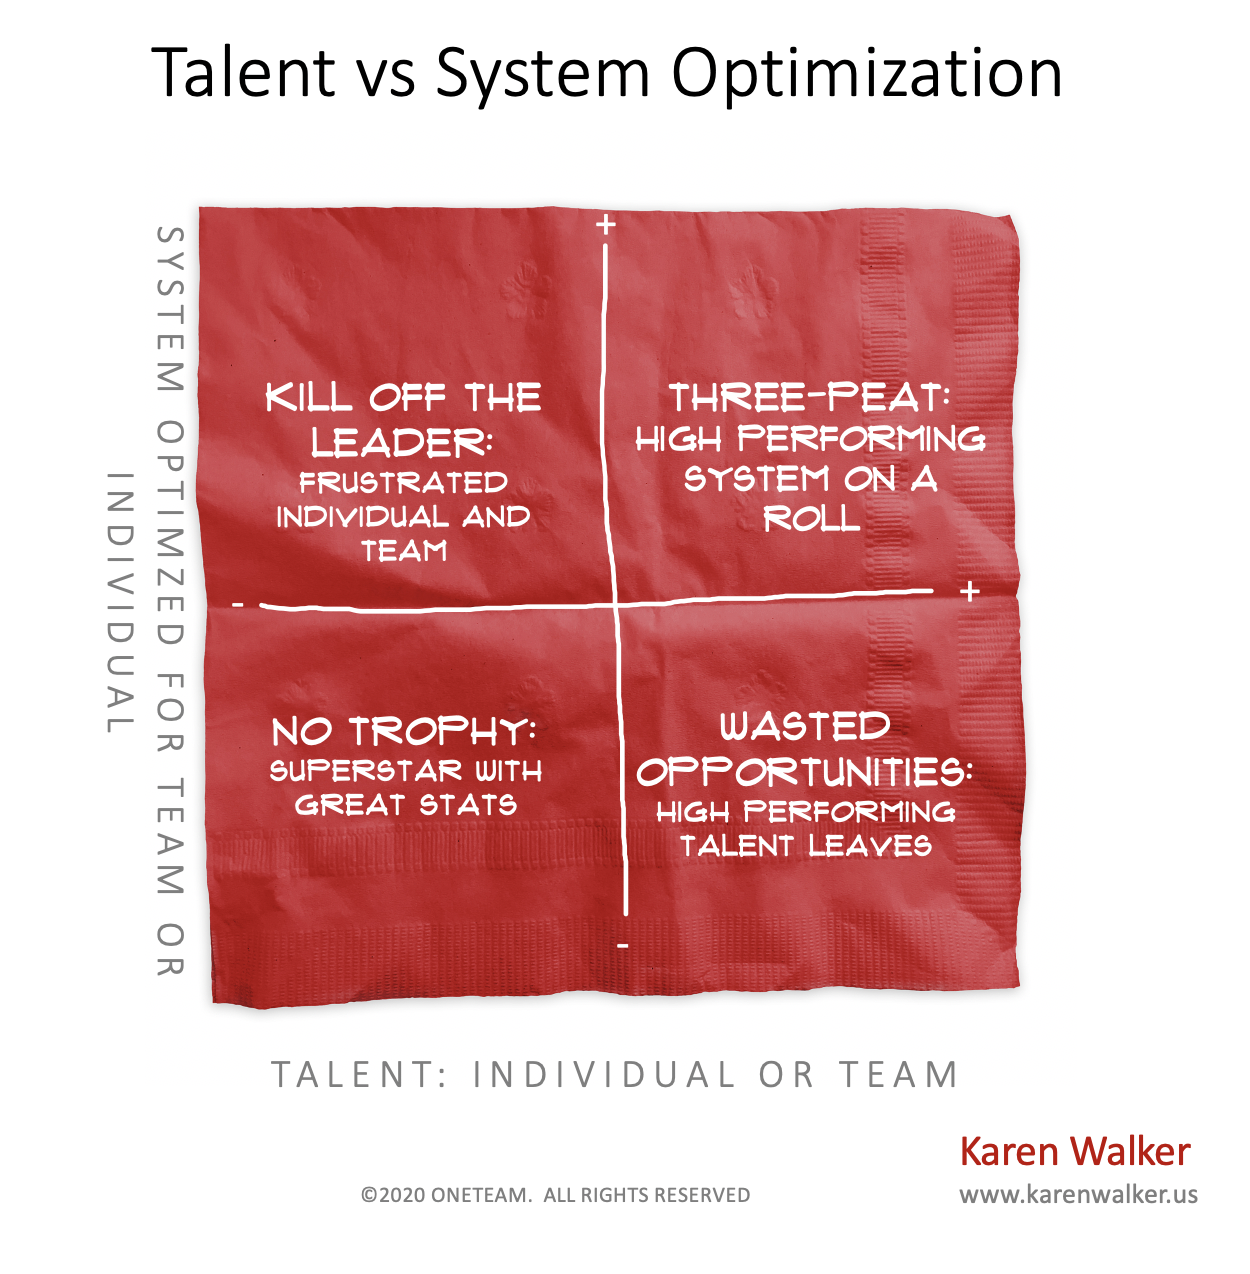 Inspired by ESPN’s The Last Dance and Michael Jordan - Click for the two-minute video: Talent vs System Optimization